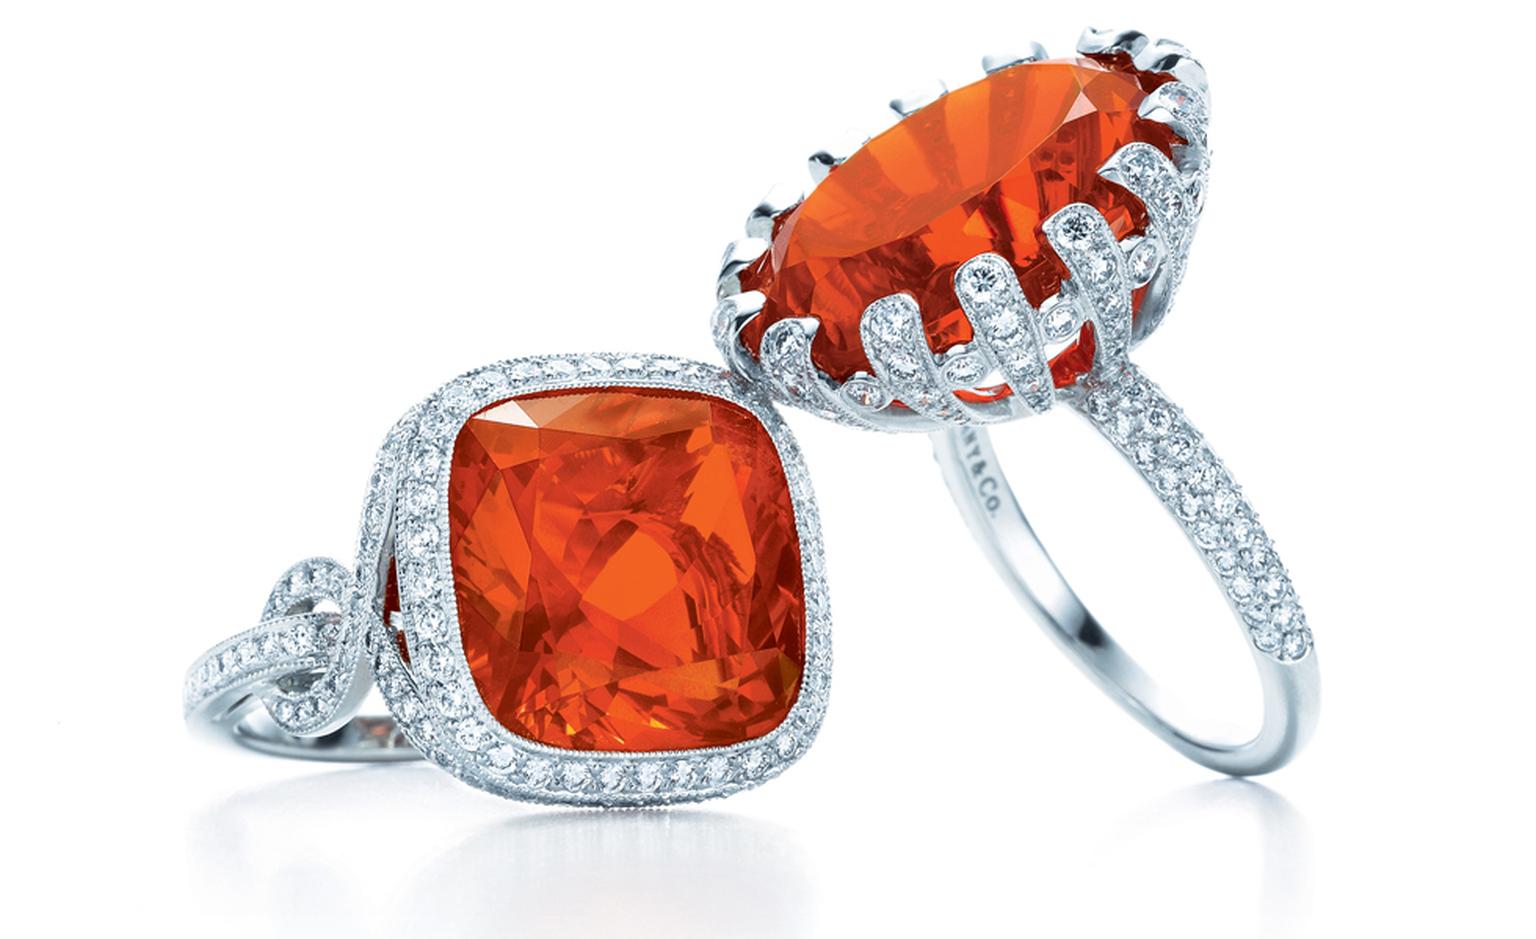 TIFFANY & CO. Cushion-cut fire opal in knot ring set in platinum oval fire opal in petals ring with diamonds set in platinums. POA